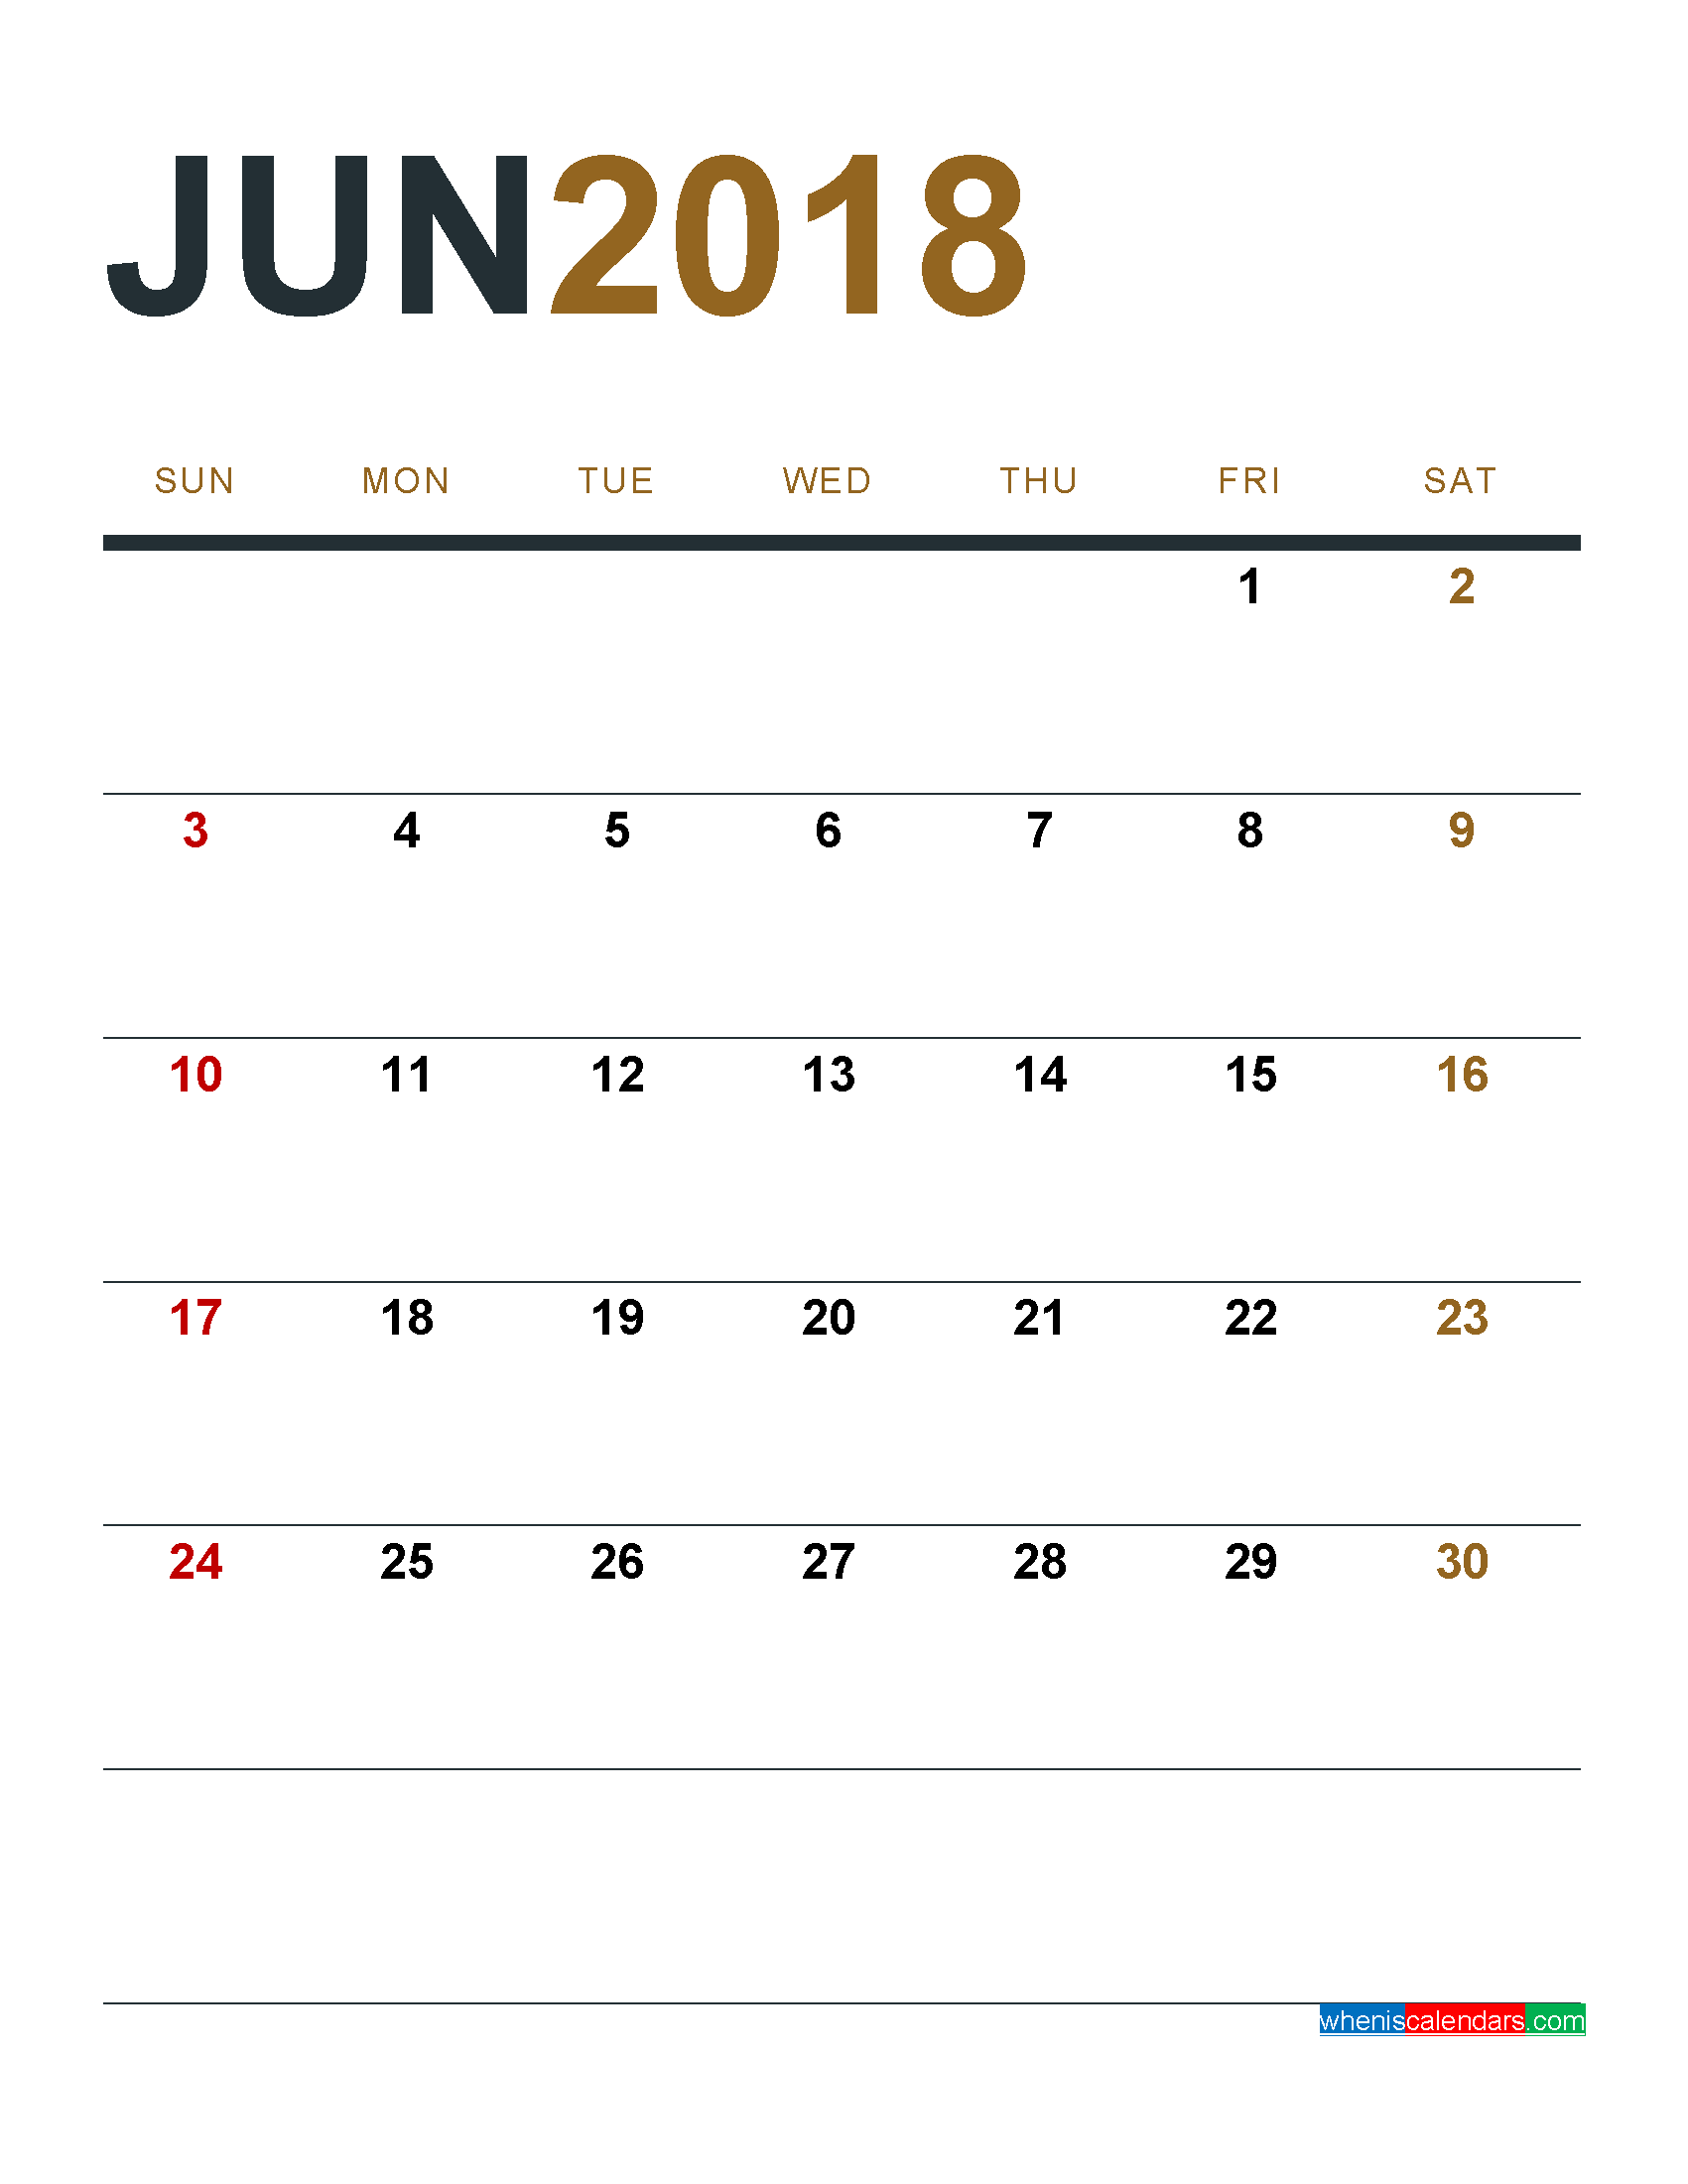 june-2018-calendar-printable-as-pdf-and-image-1-month-1-page-free